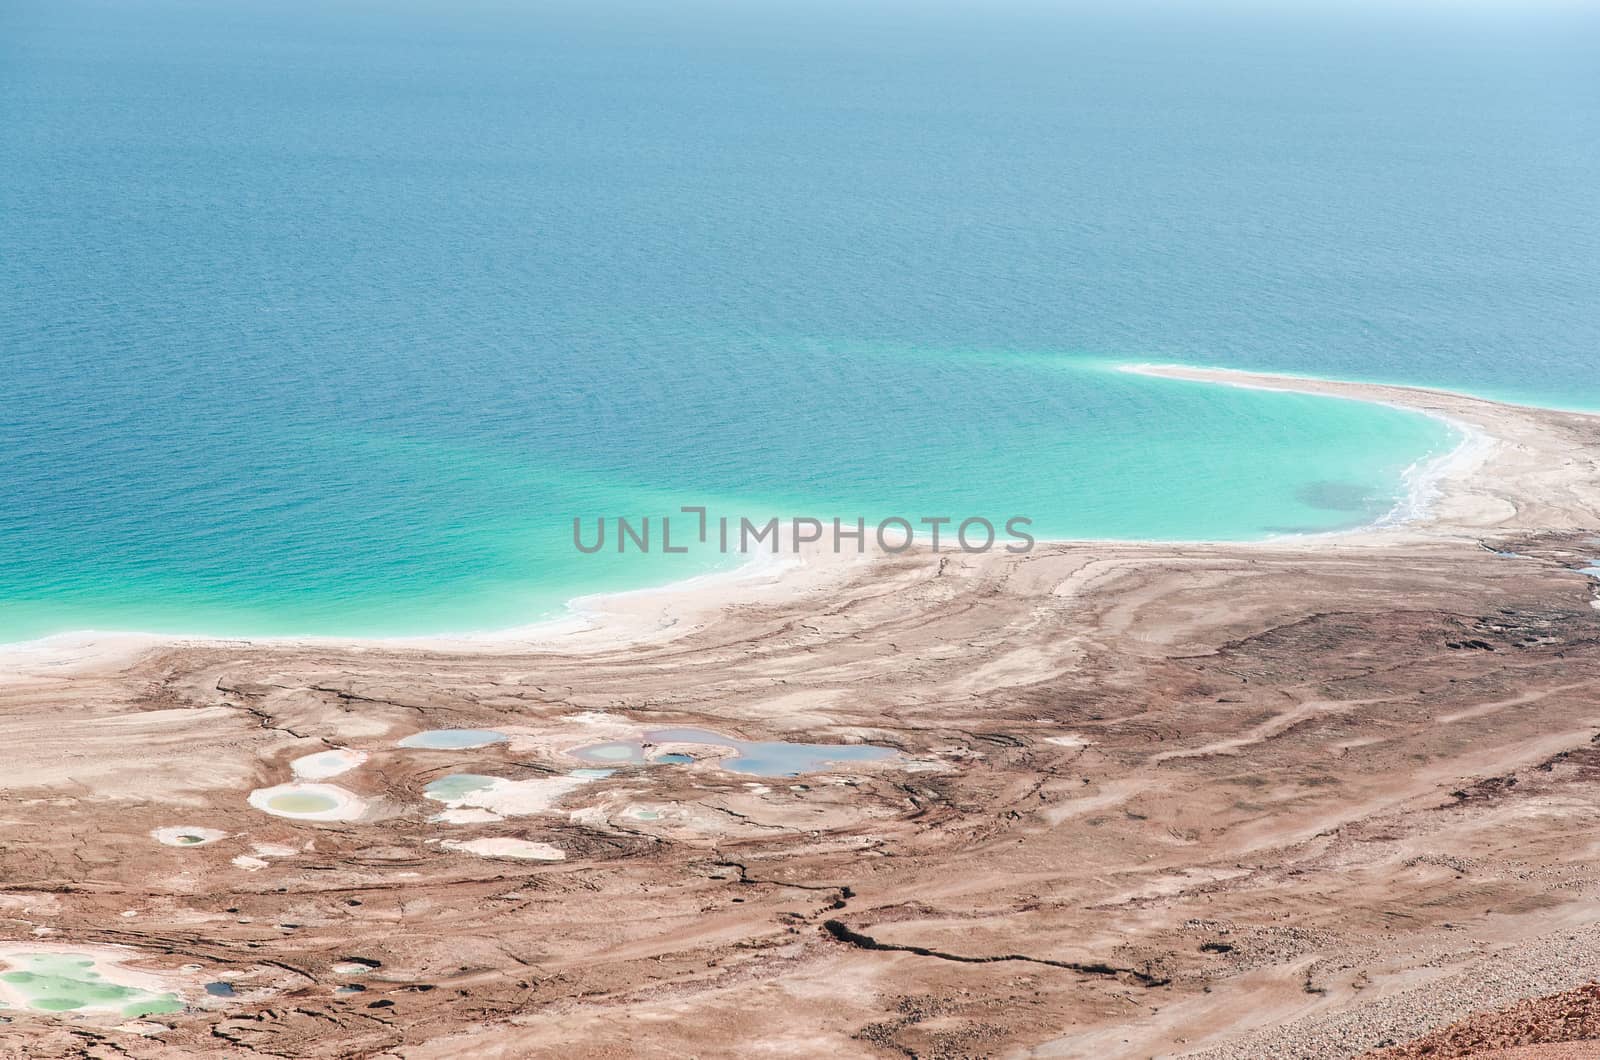 Natural environmental disaster on Dead Sea shores. Water level decreases and surface rapidly shrinking due to human activity.